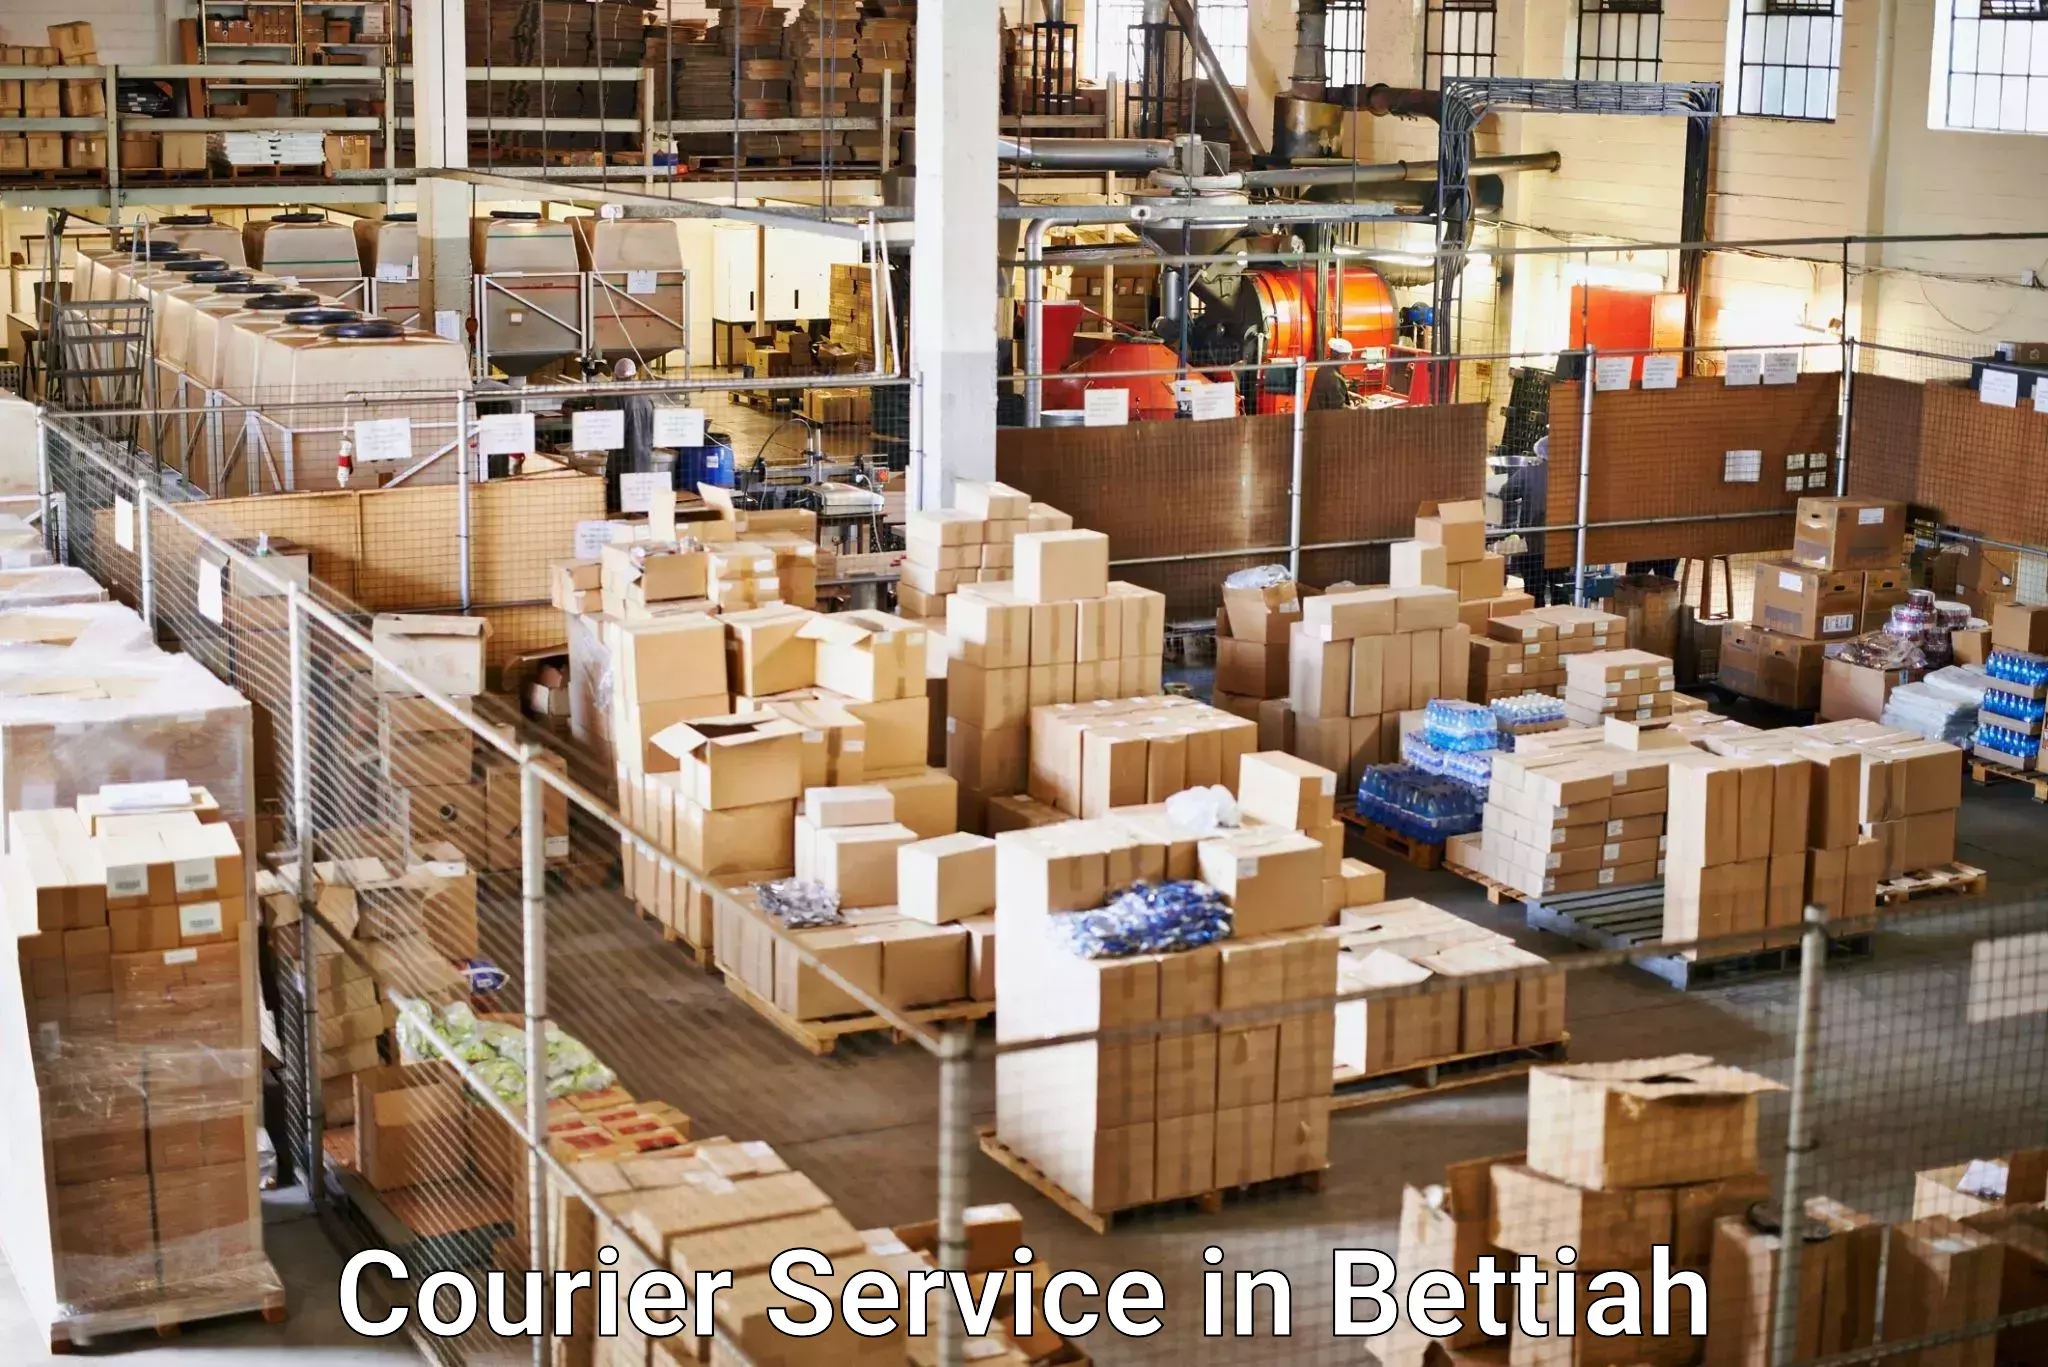 Courier service innovation in Bettiah